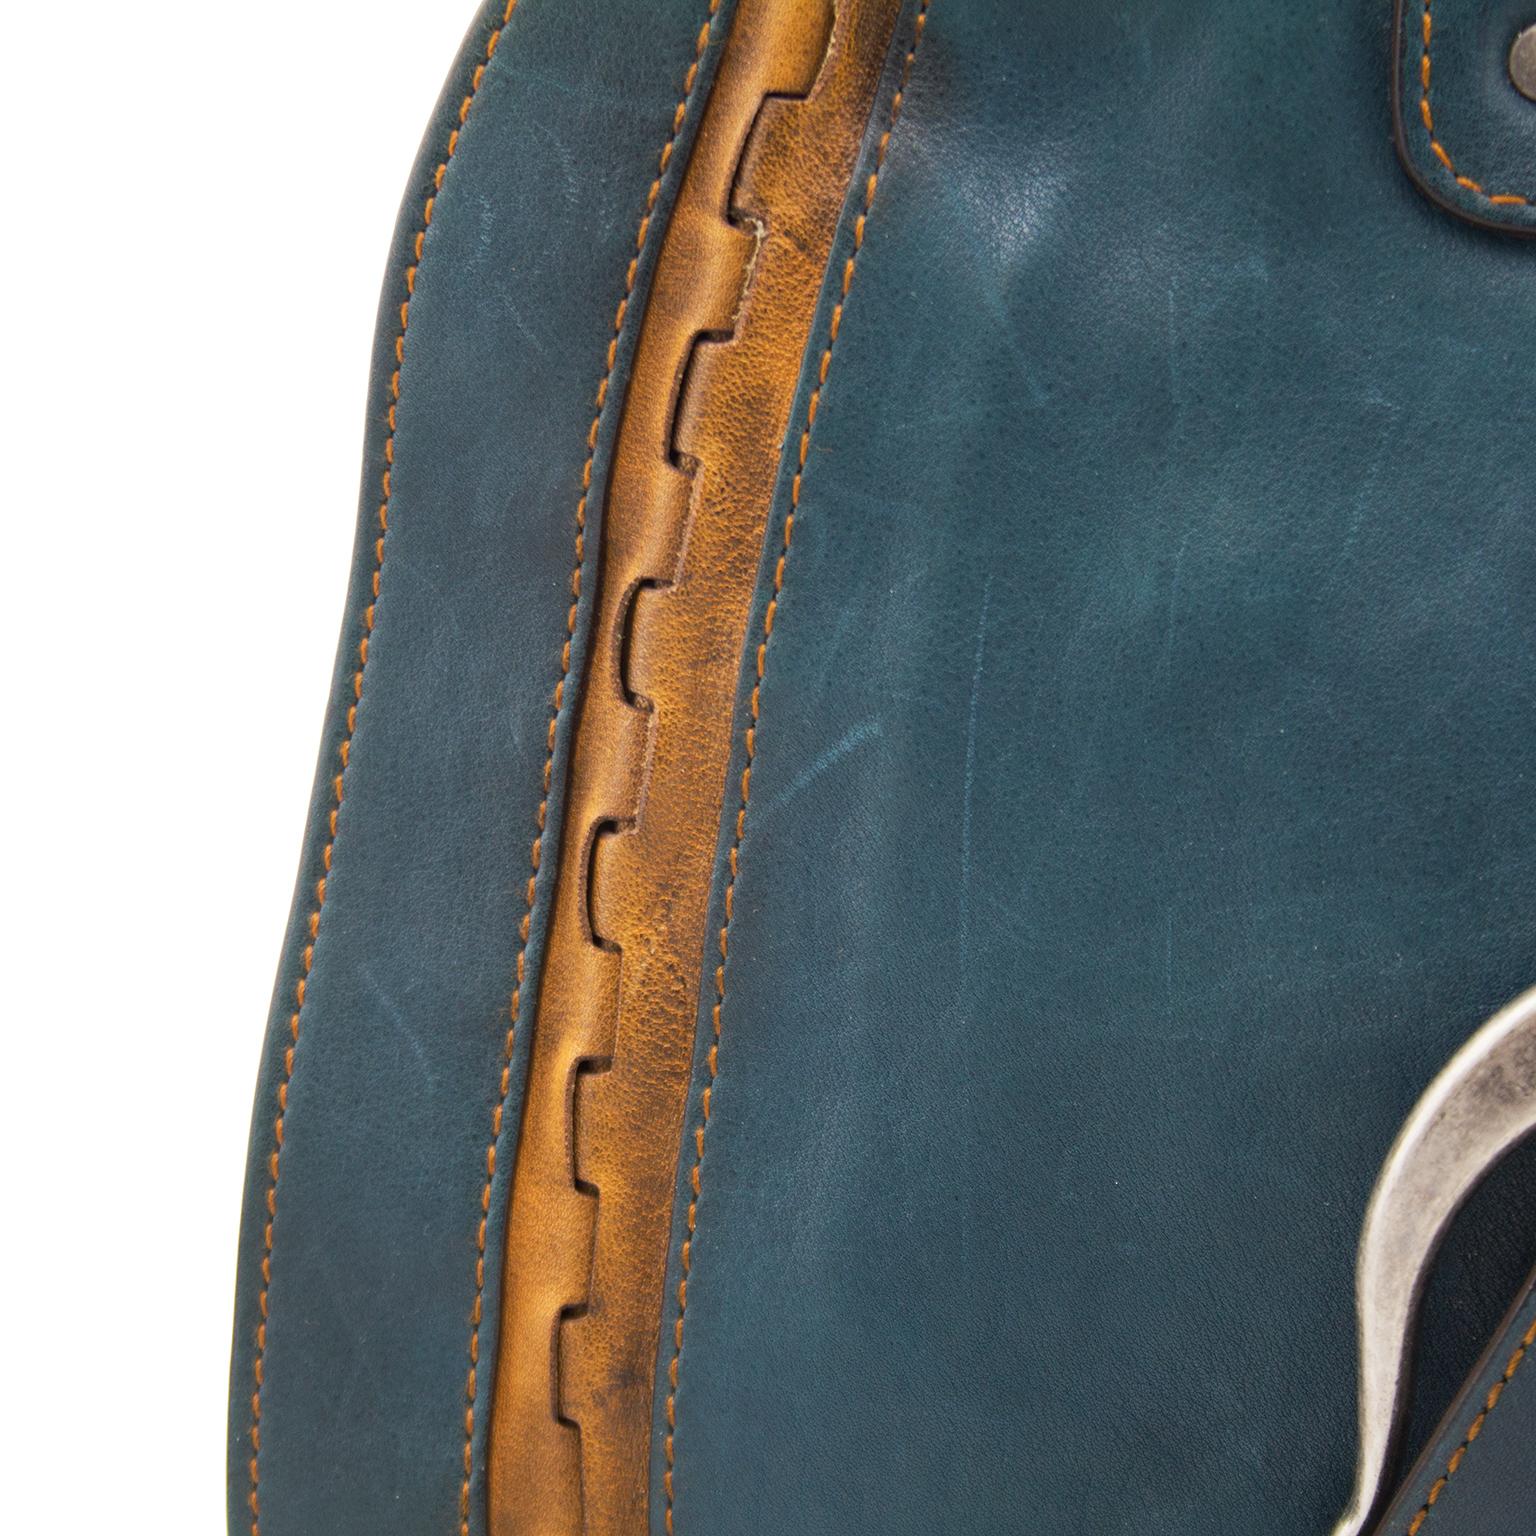 S/S 2006 Dior Double Gaucho Teal Blue Leather Saddle bag In Excellent Condition In Toronto, Ontario